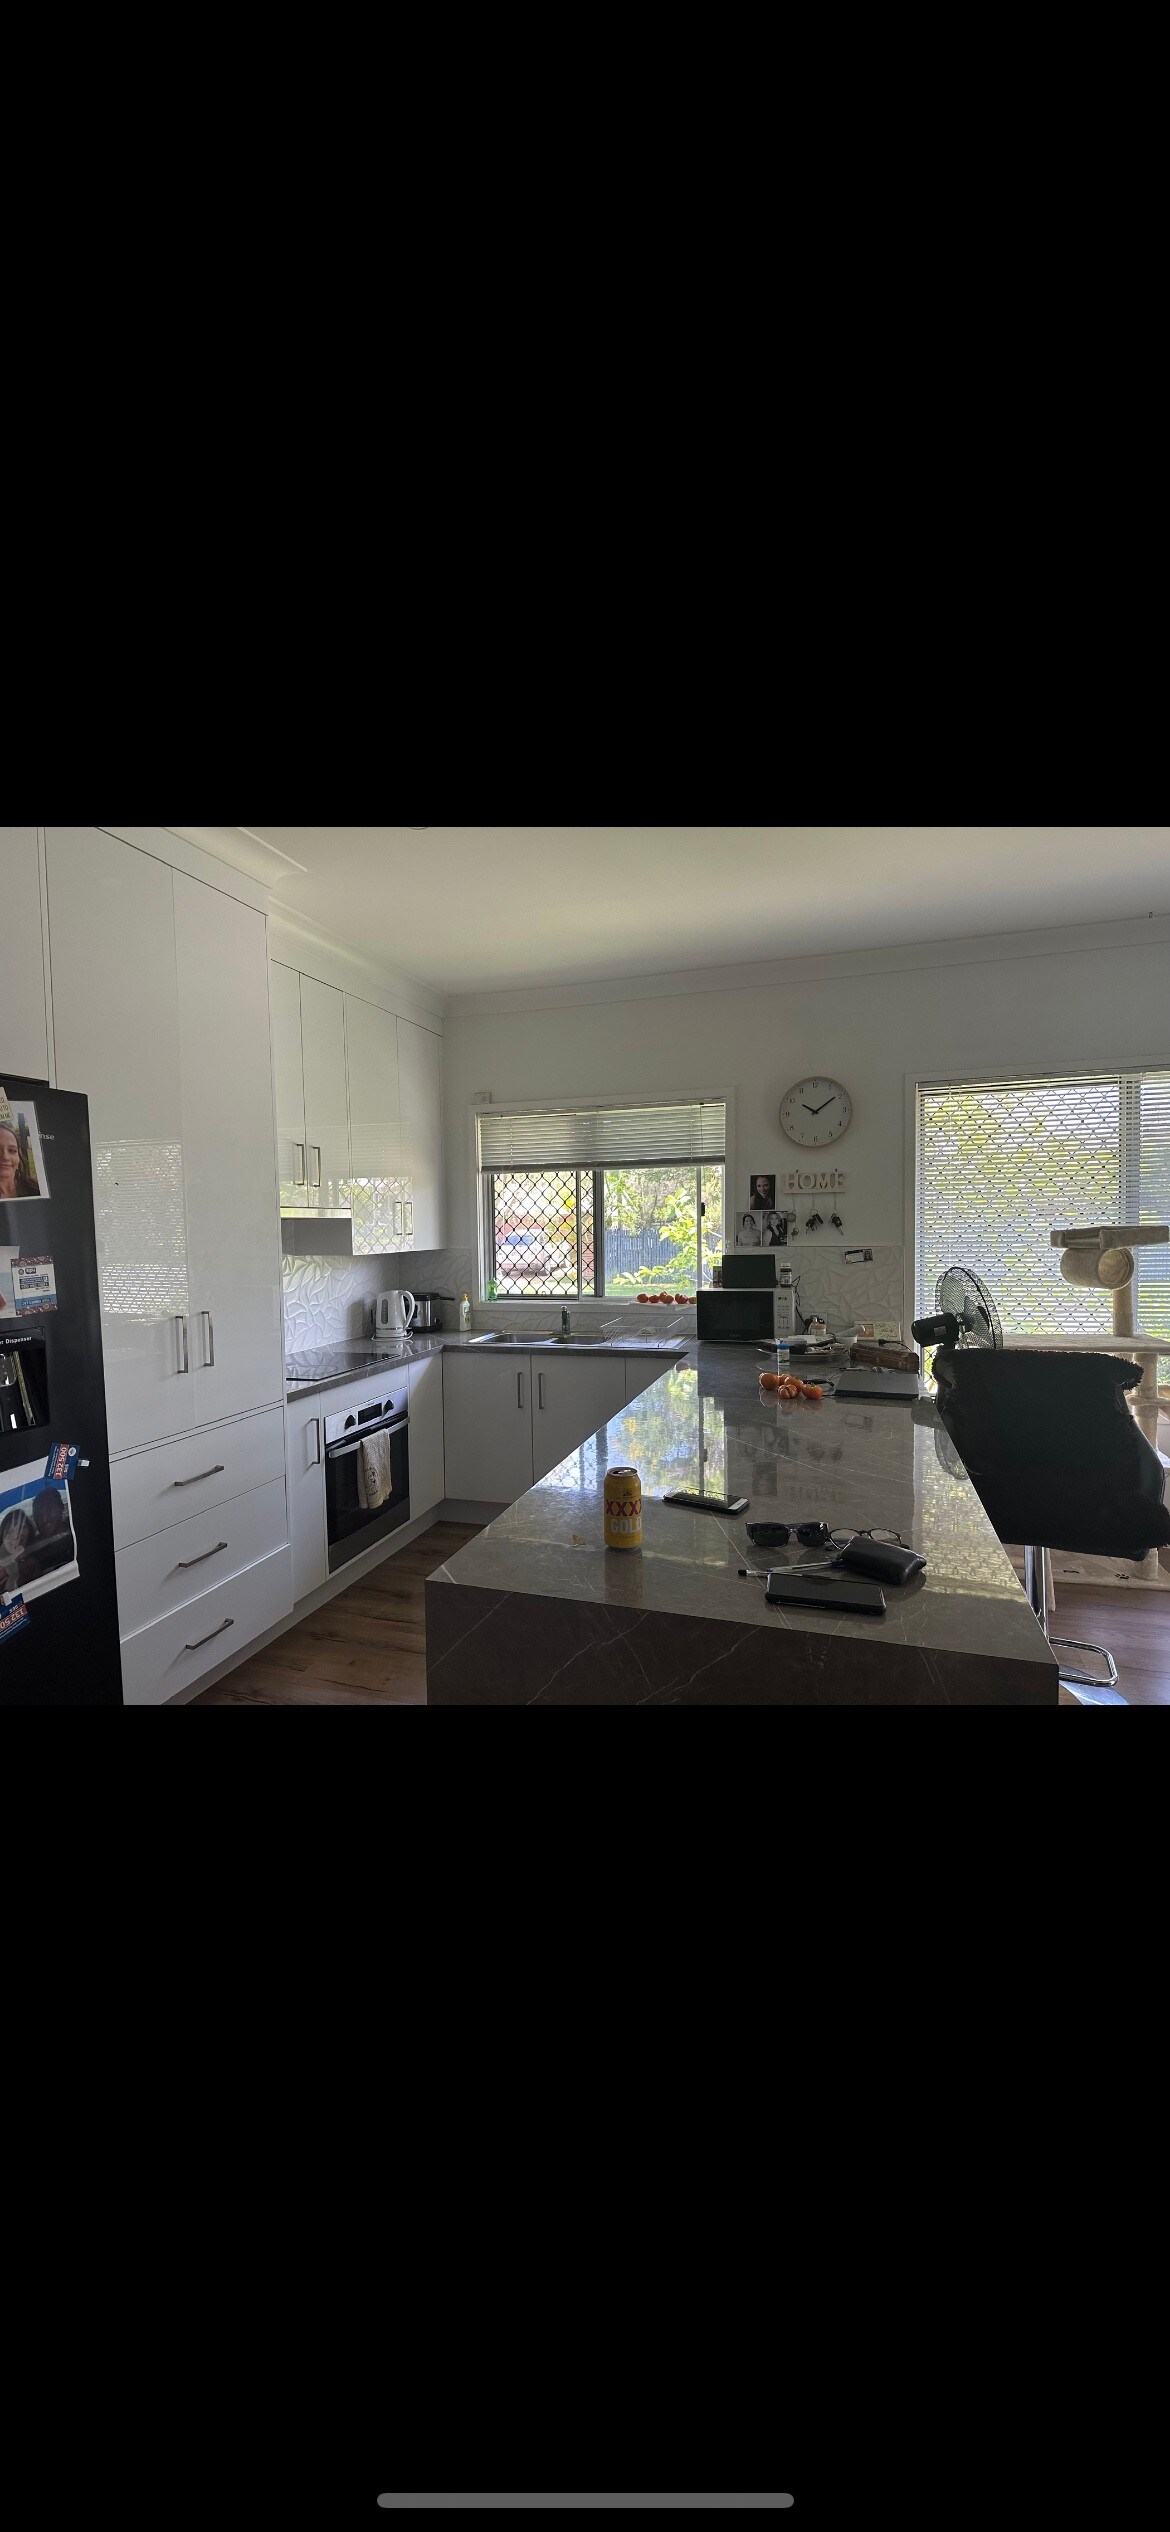 3 Bedroom House - 5 min from Beef Week ShowGrounds